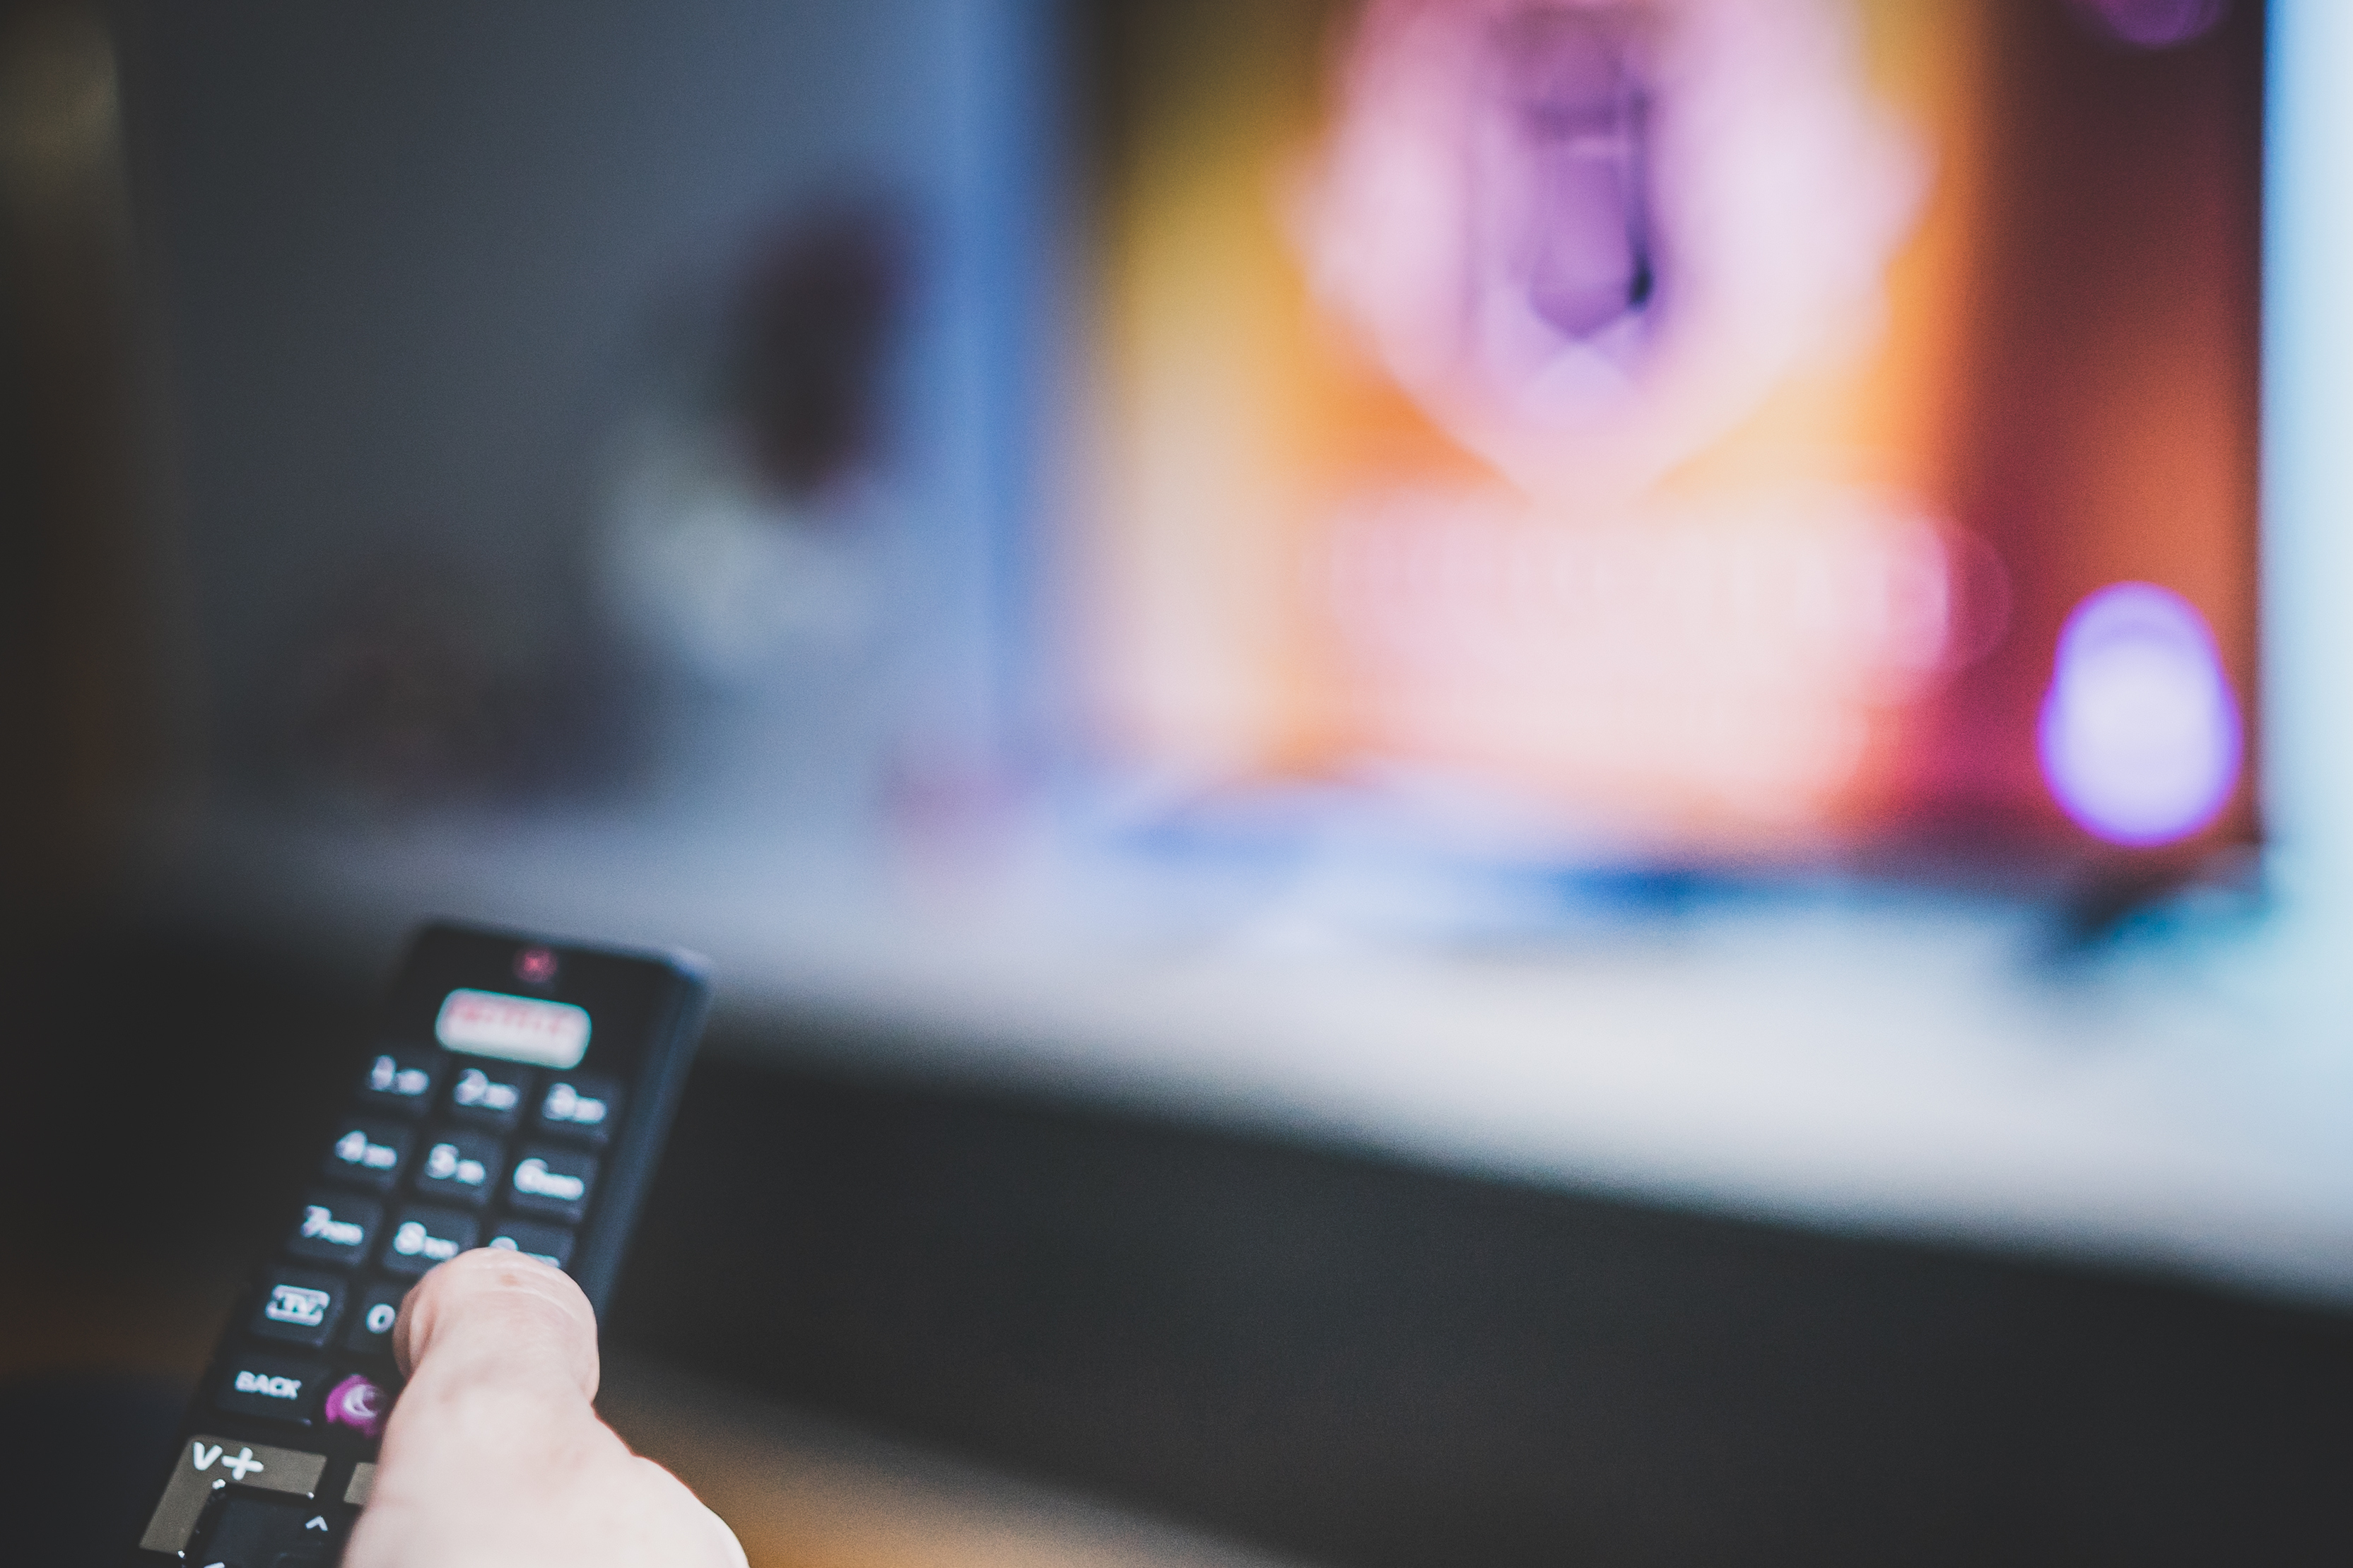 Person holding a remote, blurry TV screen in the background